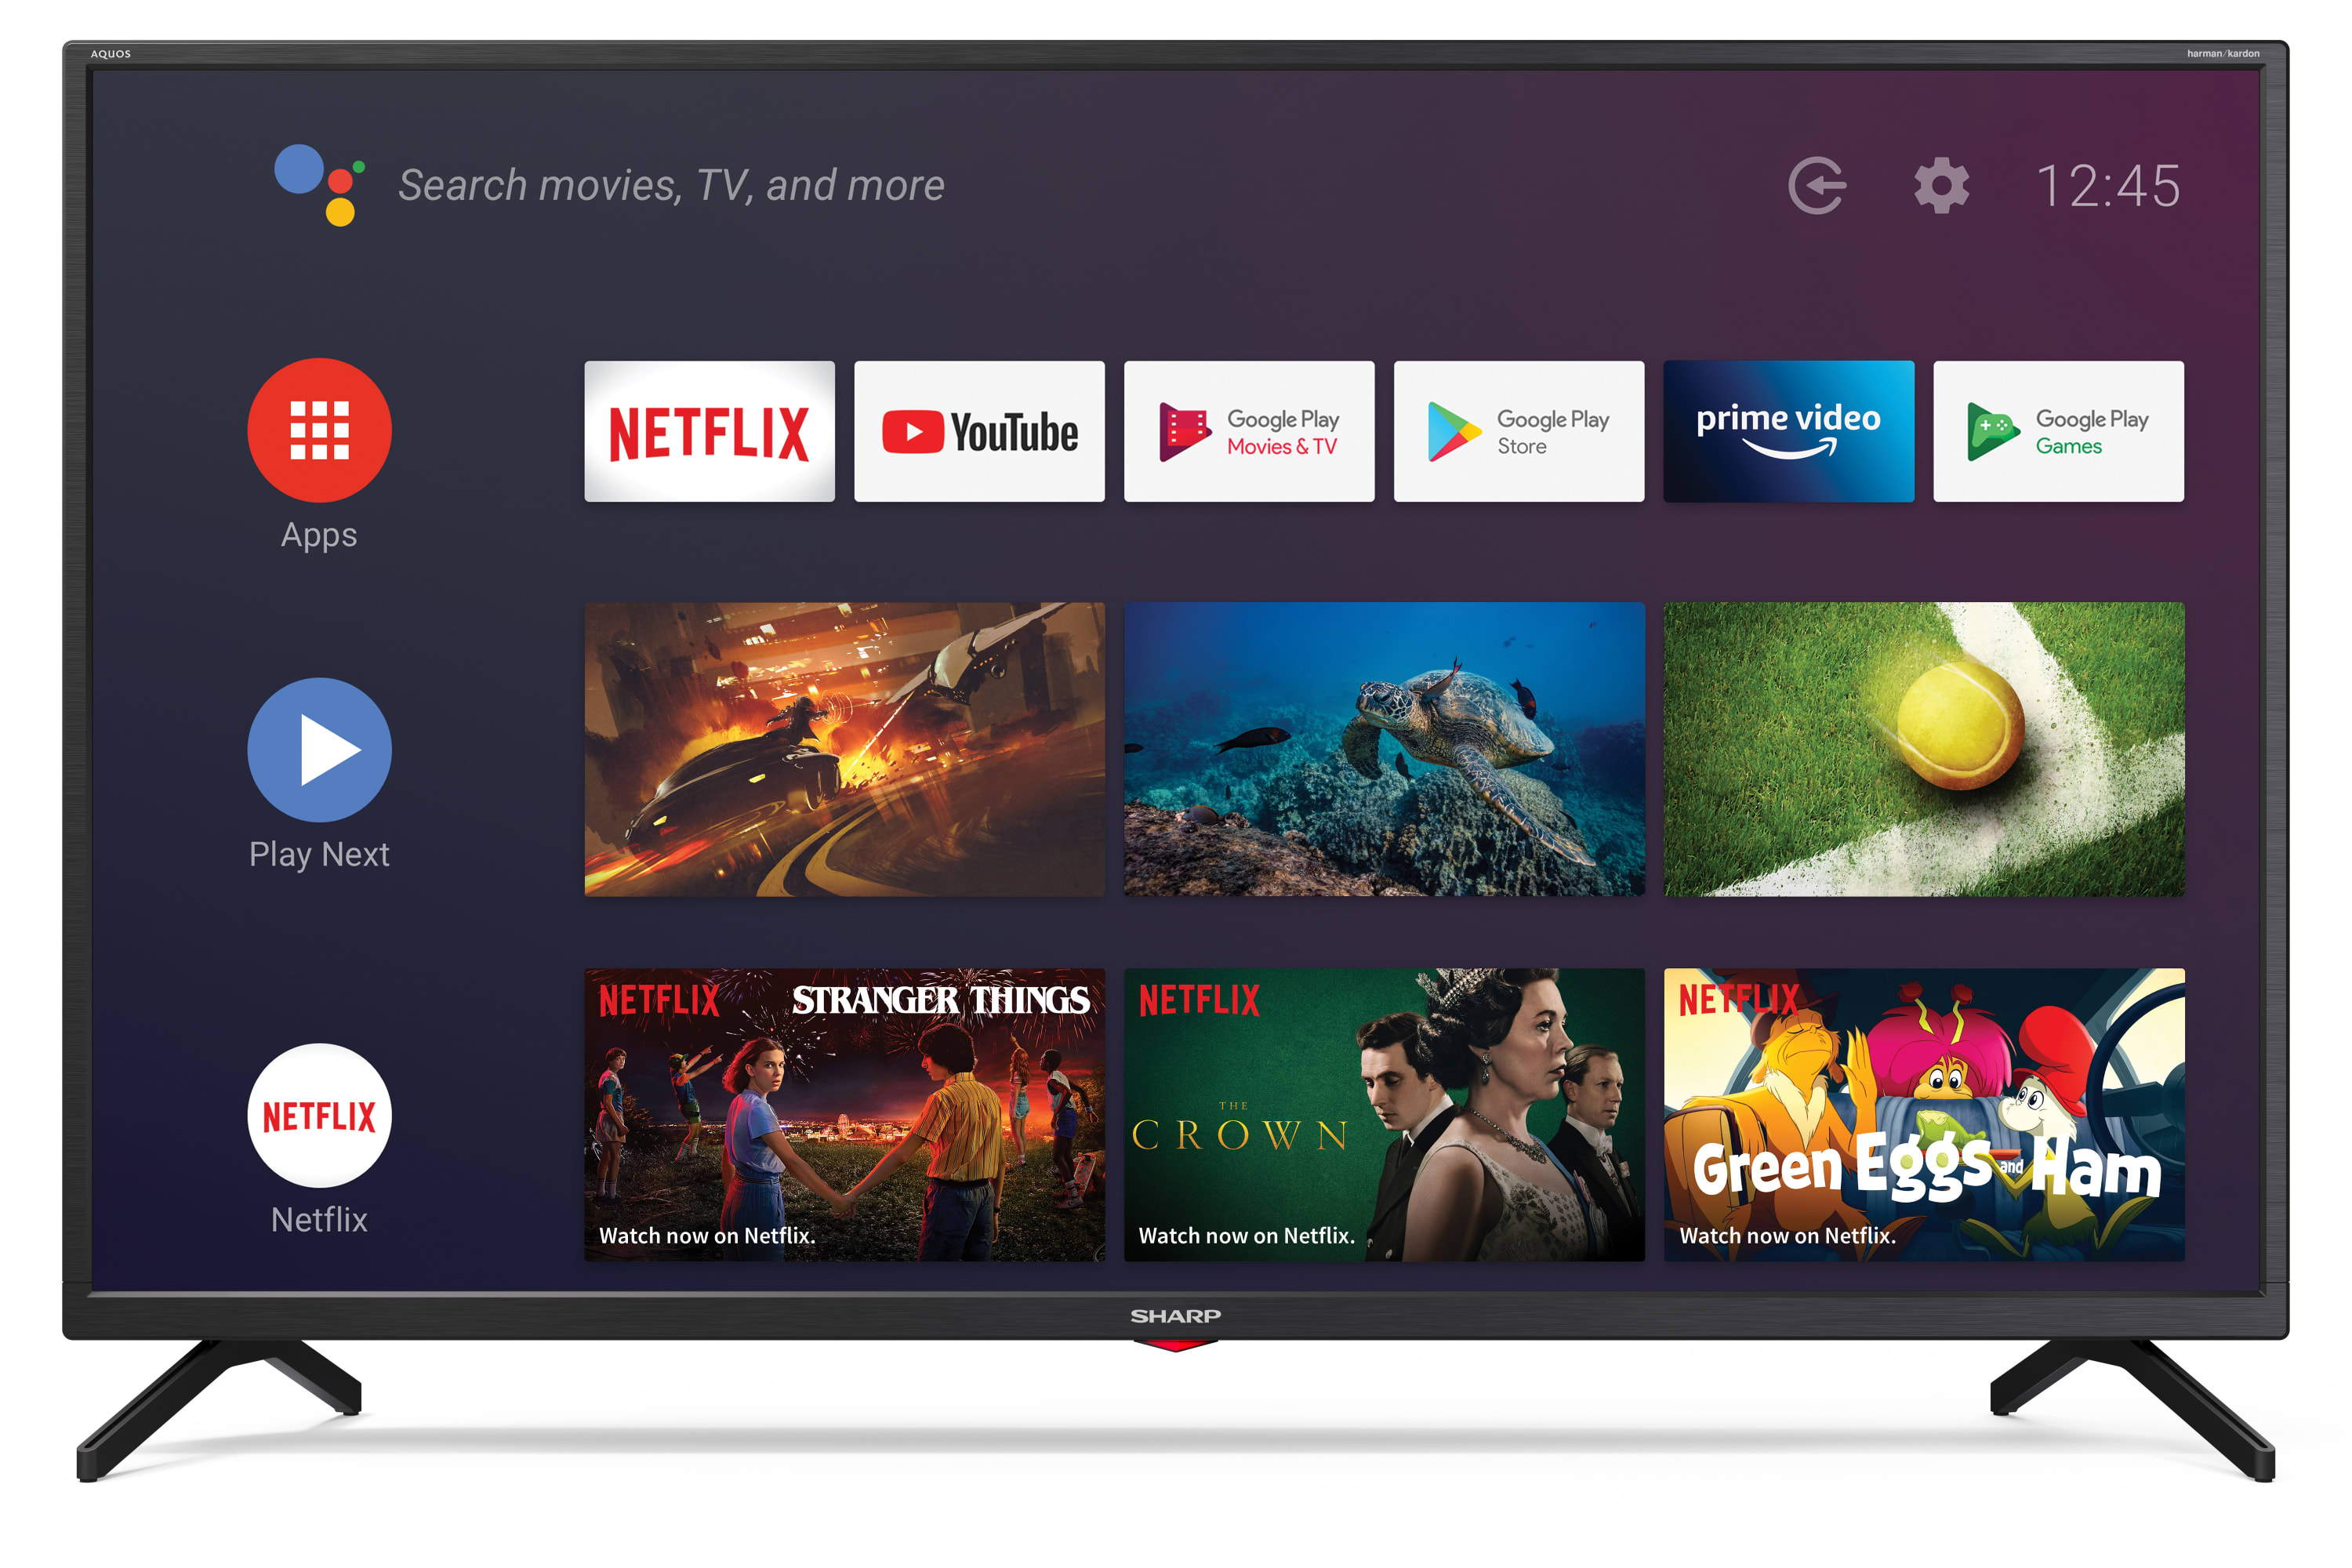 Android TV 4K UHD - ANDROID TV™ 4K ULTRA HD de 43 pol.